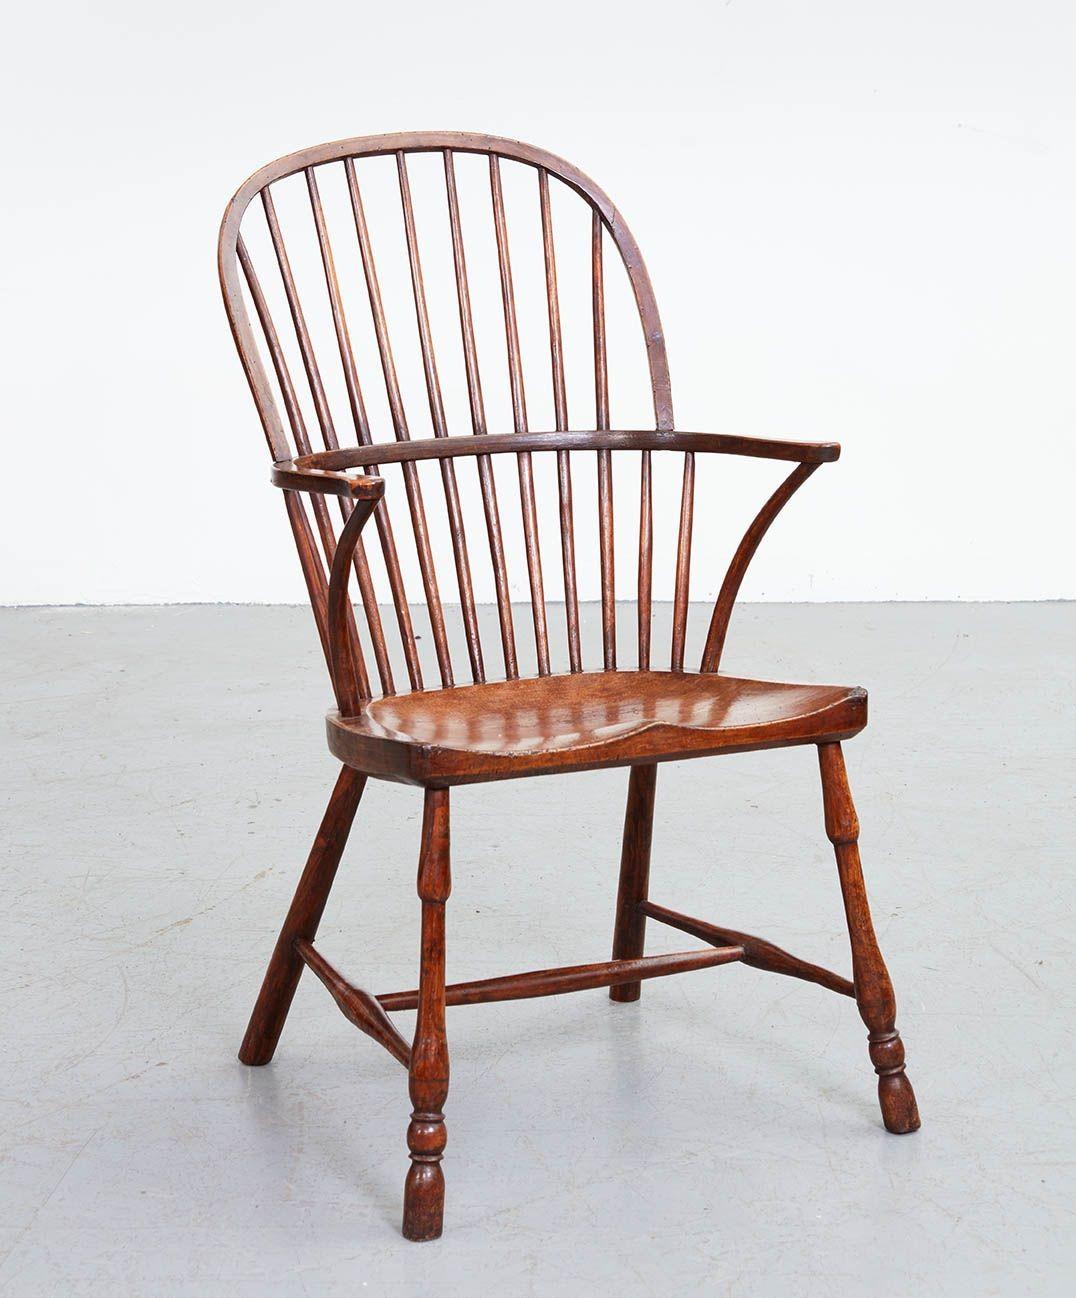 An early 19th century Scottish windsor chair in patinated elm with hoop back, saddle seat, turned front legs and adzed back legs joined by turned H-stretchers. Classic form and charming lines.